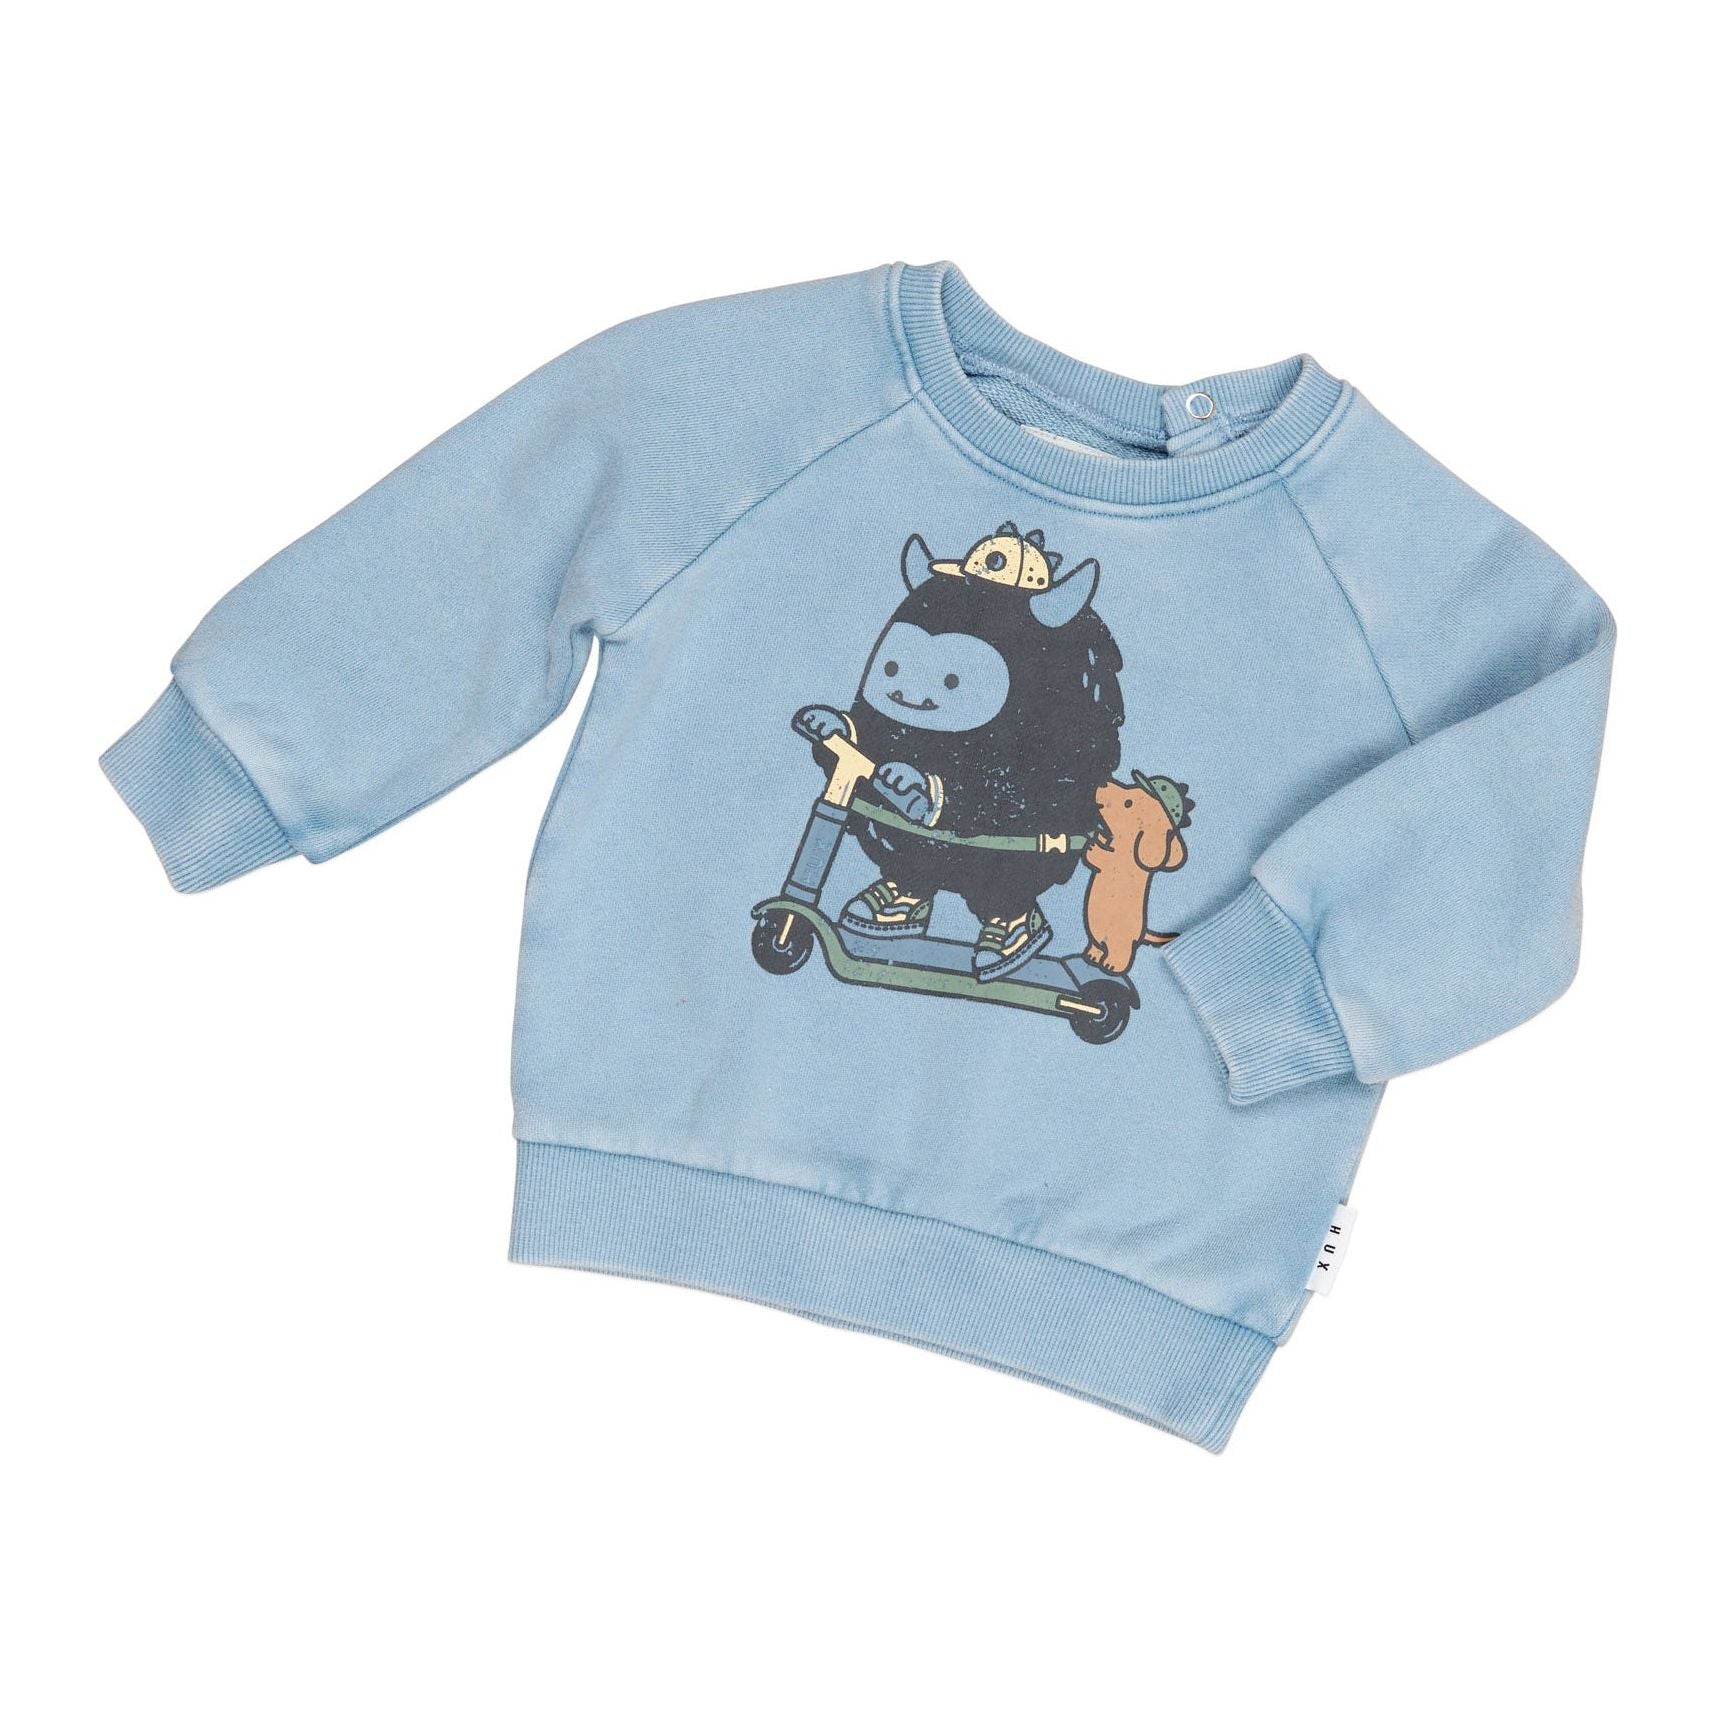 Scooter Monster Sweatshirt Washed Blue